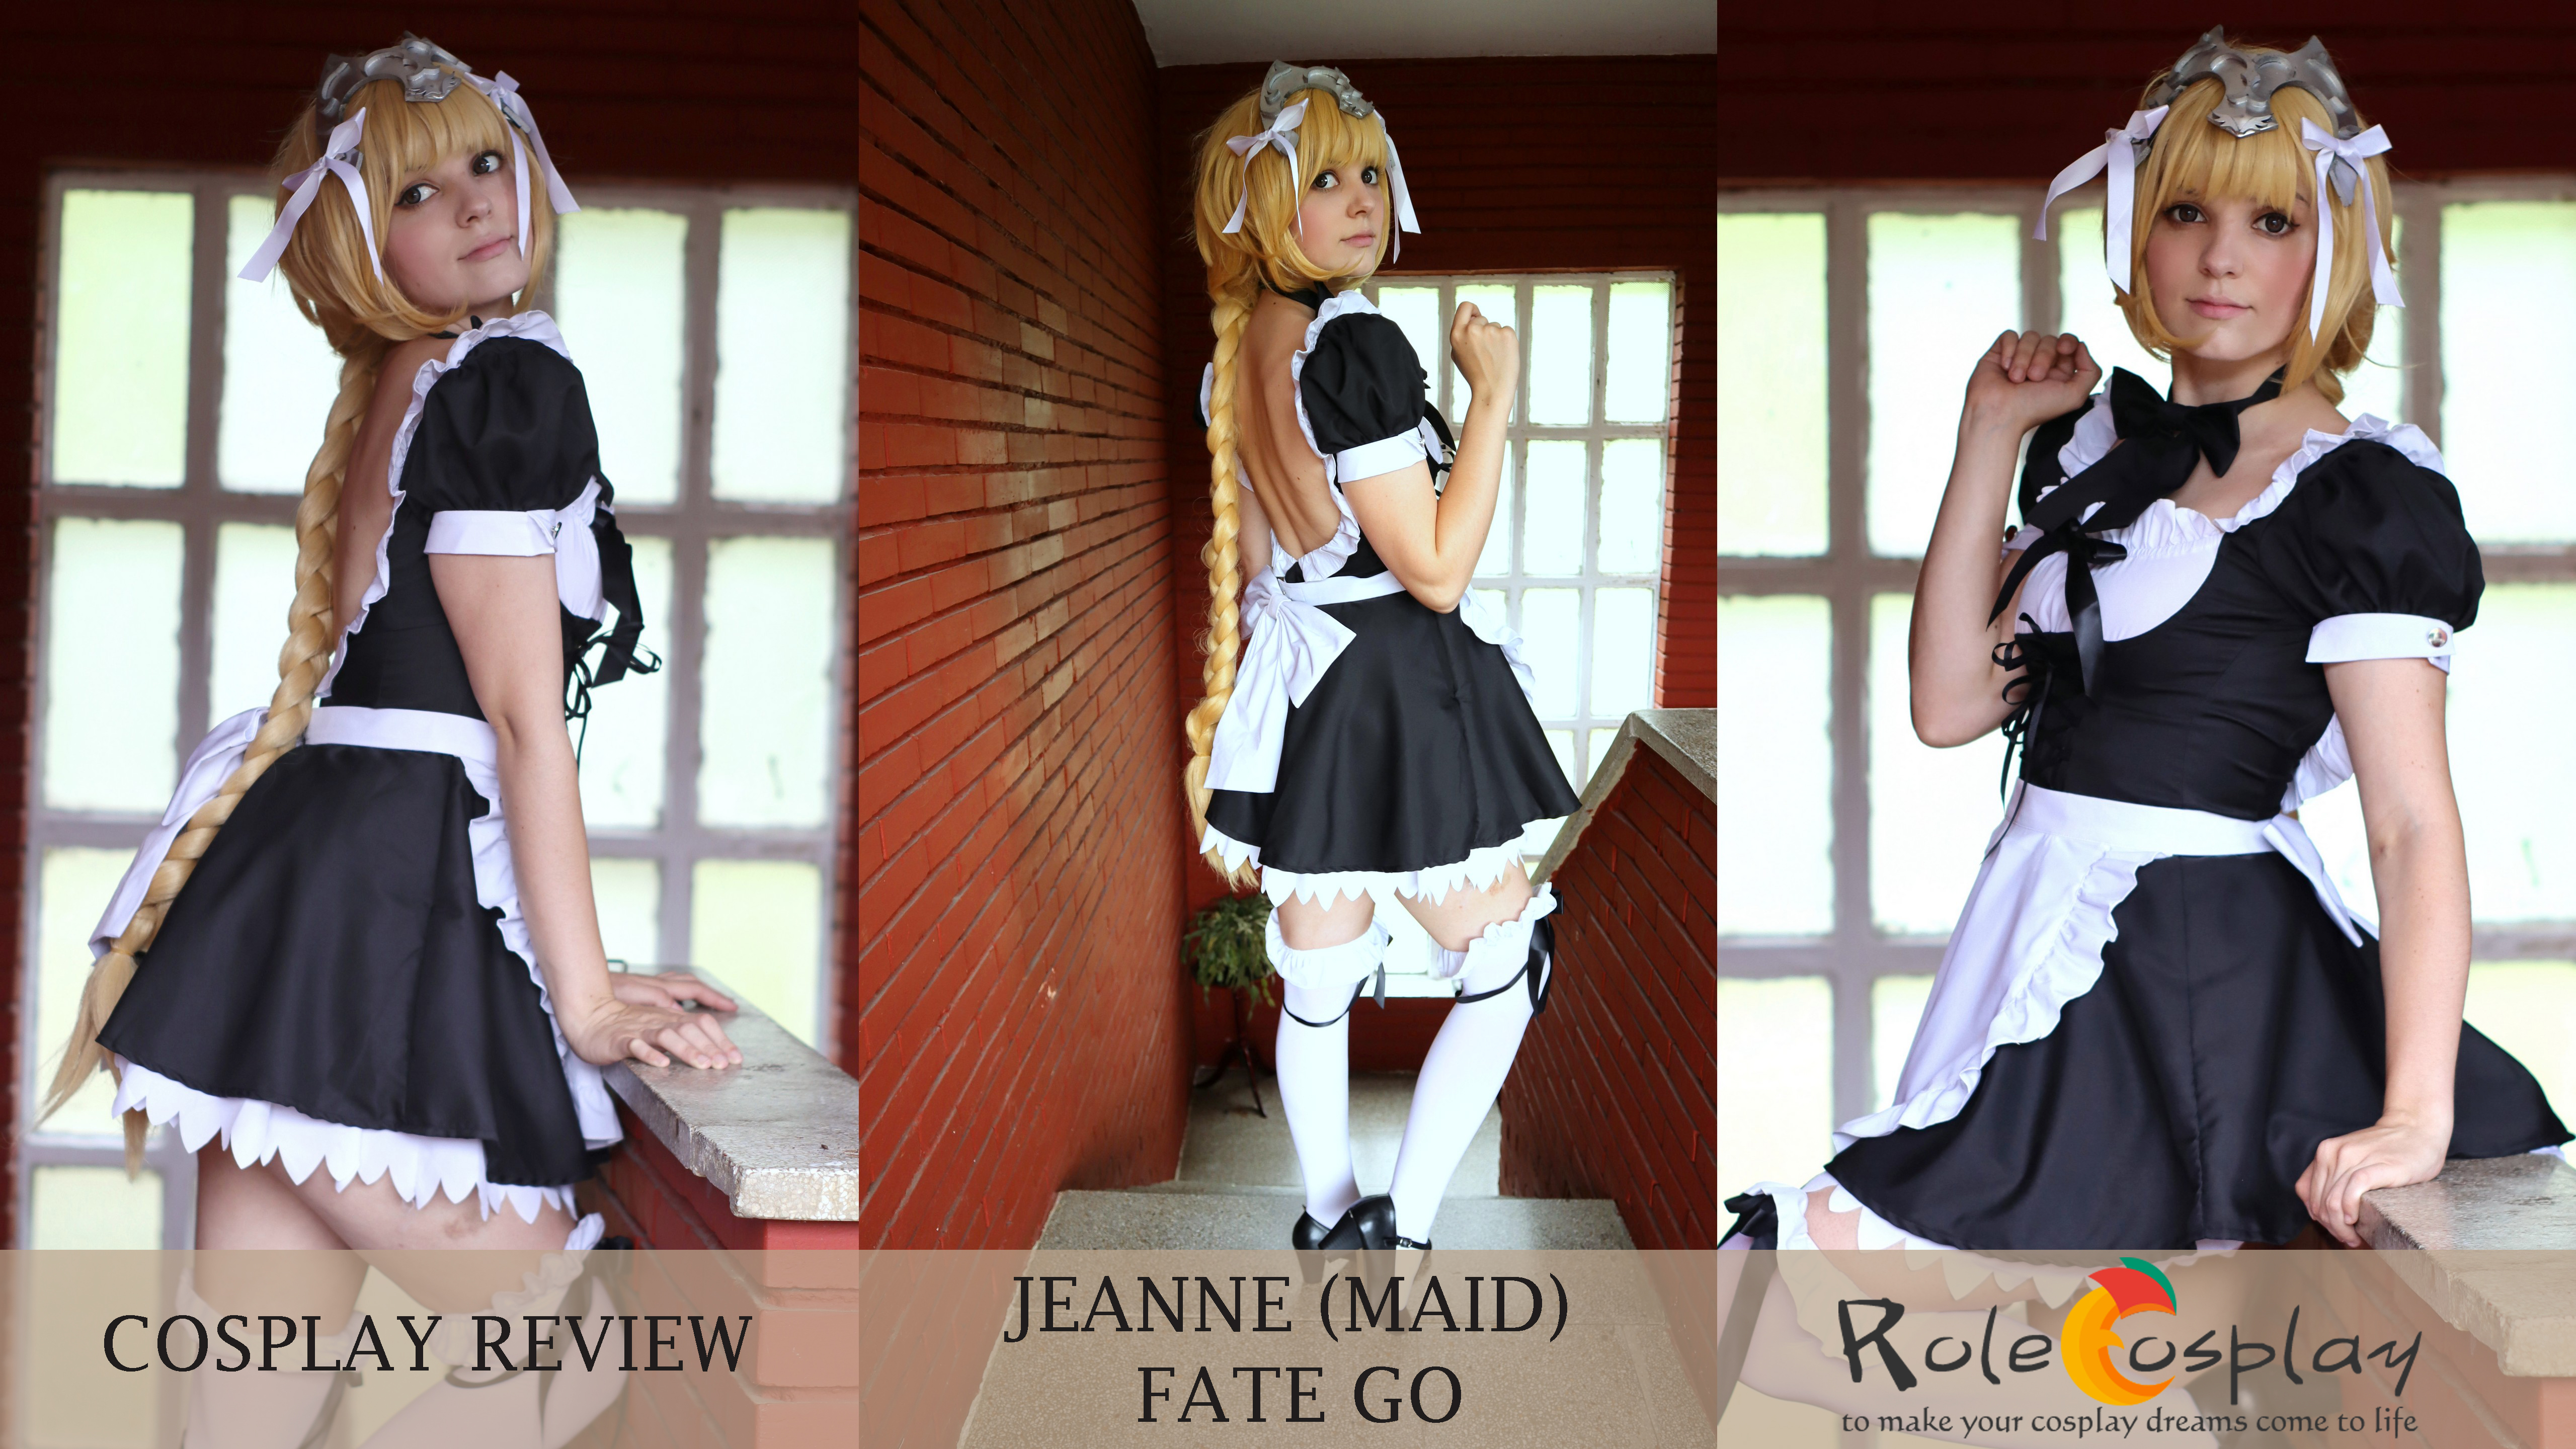 Cosplay Review: Jeanne Maid Dress (Fate GO) from Rolecosplay